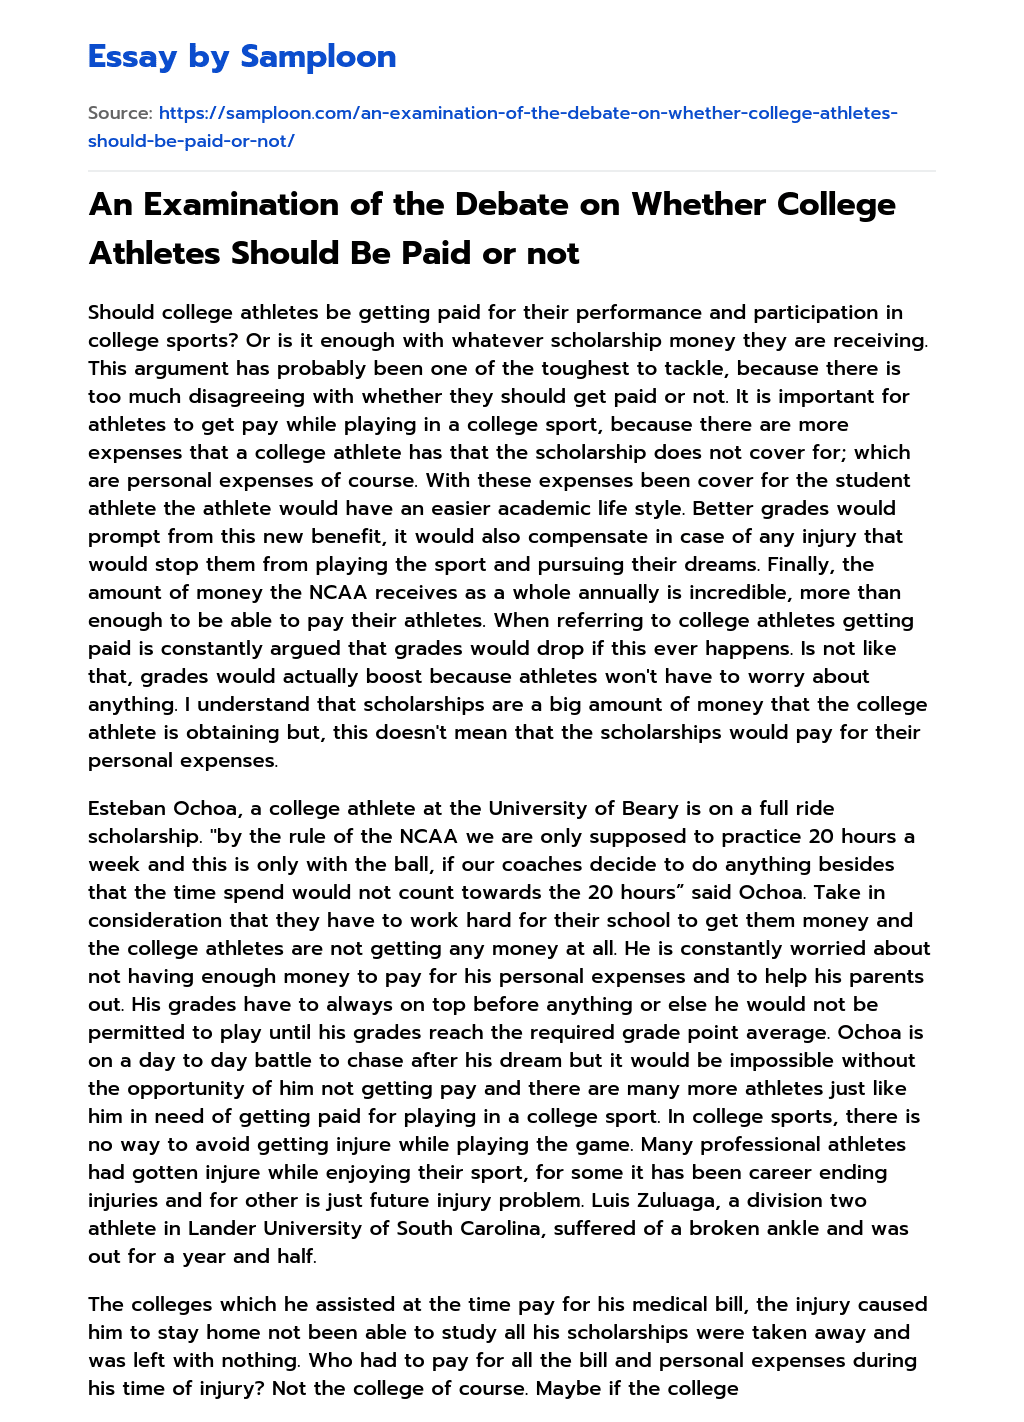 An Examination of the Debate on Whether College Athletes Should Be Paid or not essay